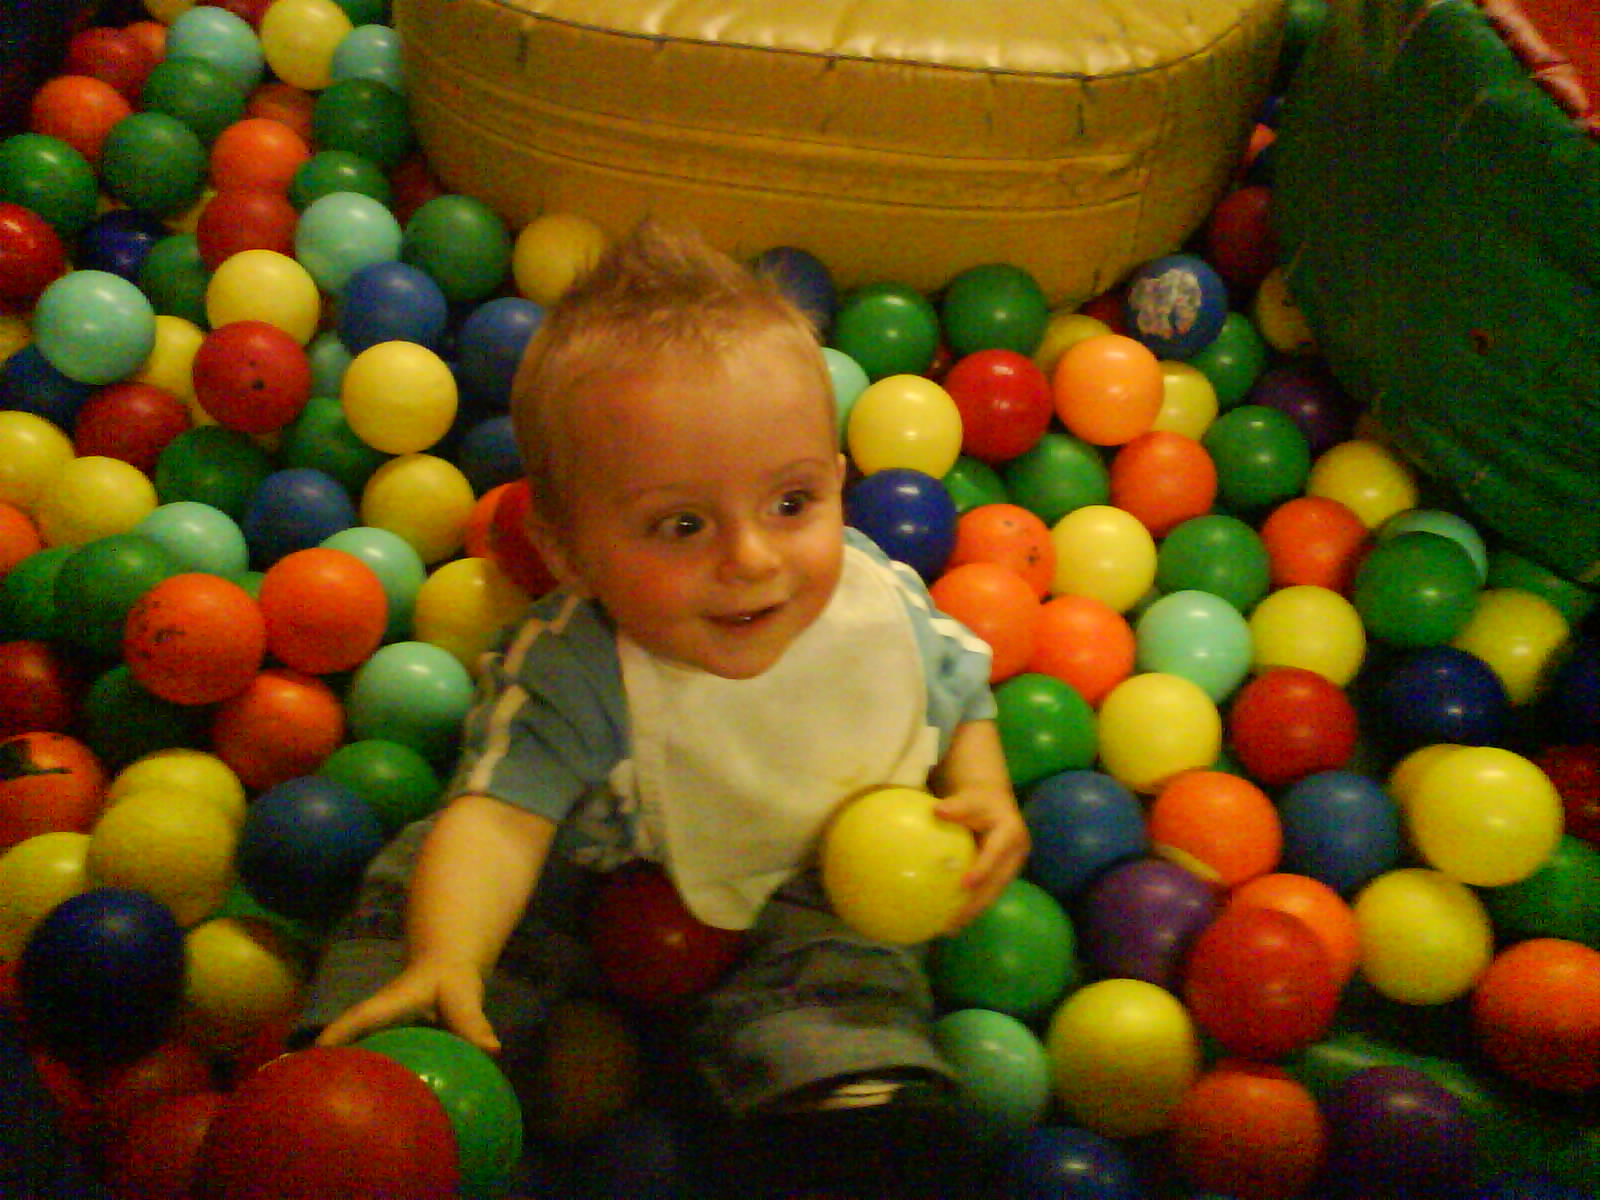 Rhys at 9 months old playing in a ball pit